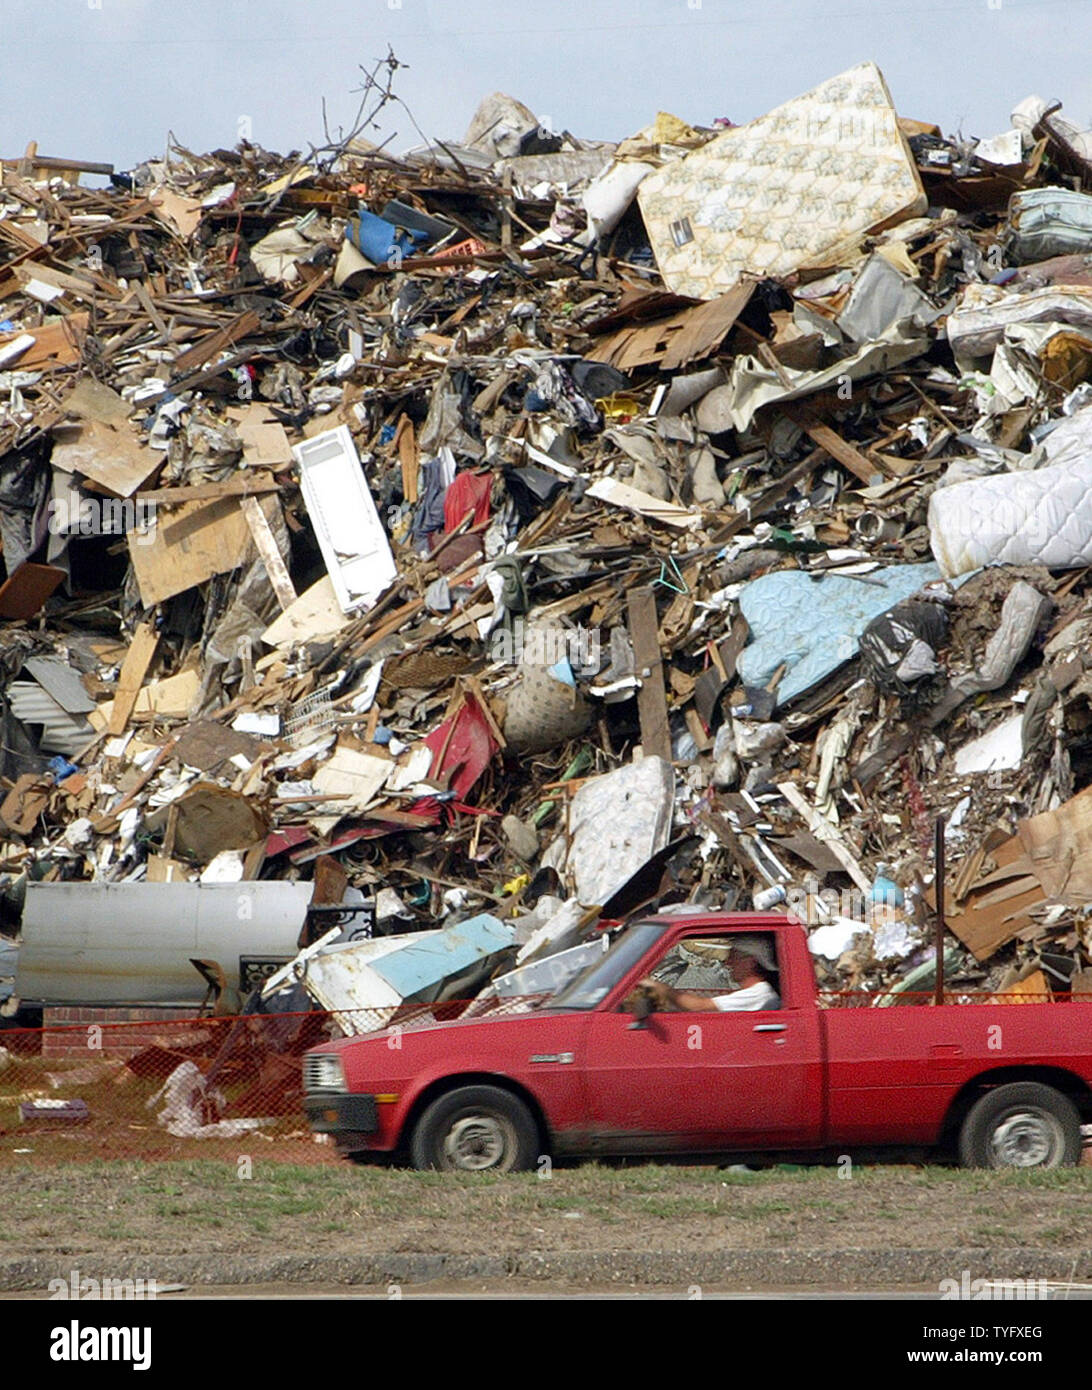 A New Orleans resident drives past a mountain of trash, which is being referred to as simply 'the pile', as it continues to grow in the Lakeview neighborhood of New Orleans November 14, 2005.  The pile is created by residents gut and repair their houses as they return to their flood-damaged homes in the aftermath of Hurricane Katrina.  About 80 percent of the city was  submerged when the nearby 17th Street Canal levee was breached during the hurricane.  Now, contractors with trucks and small bulldozers move constantly through the city collecting curbside heaps of soggy drywall, downed trees li Stock Photo